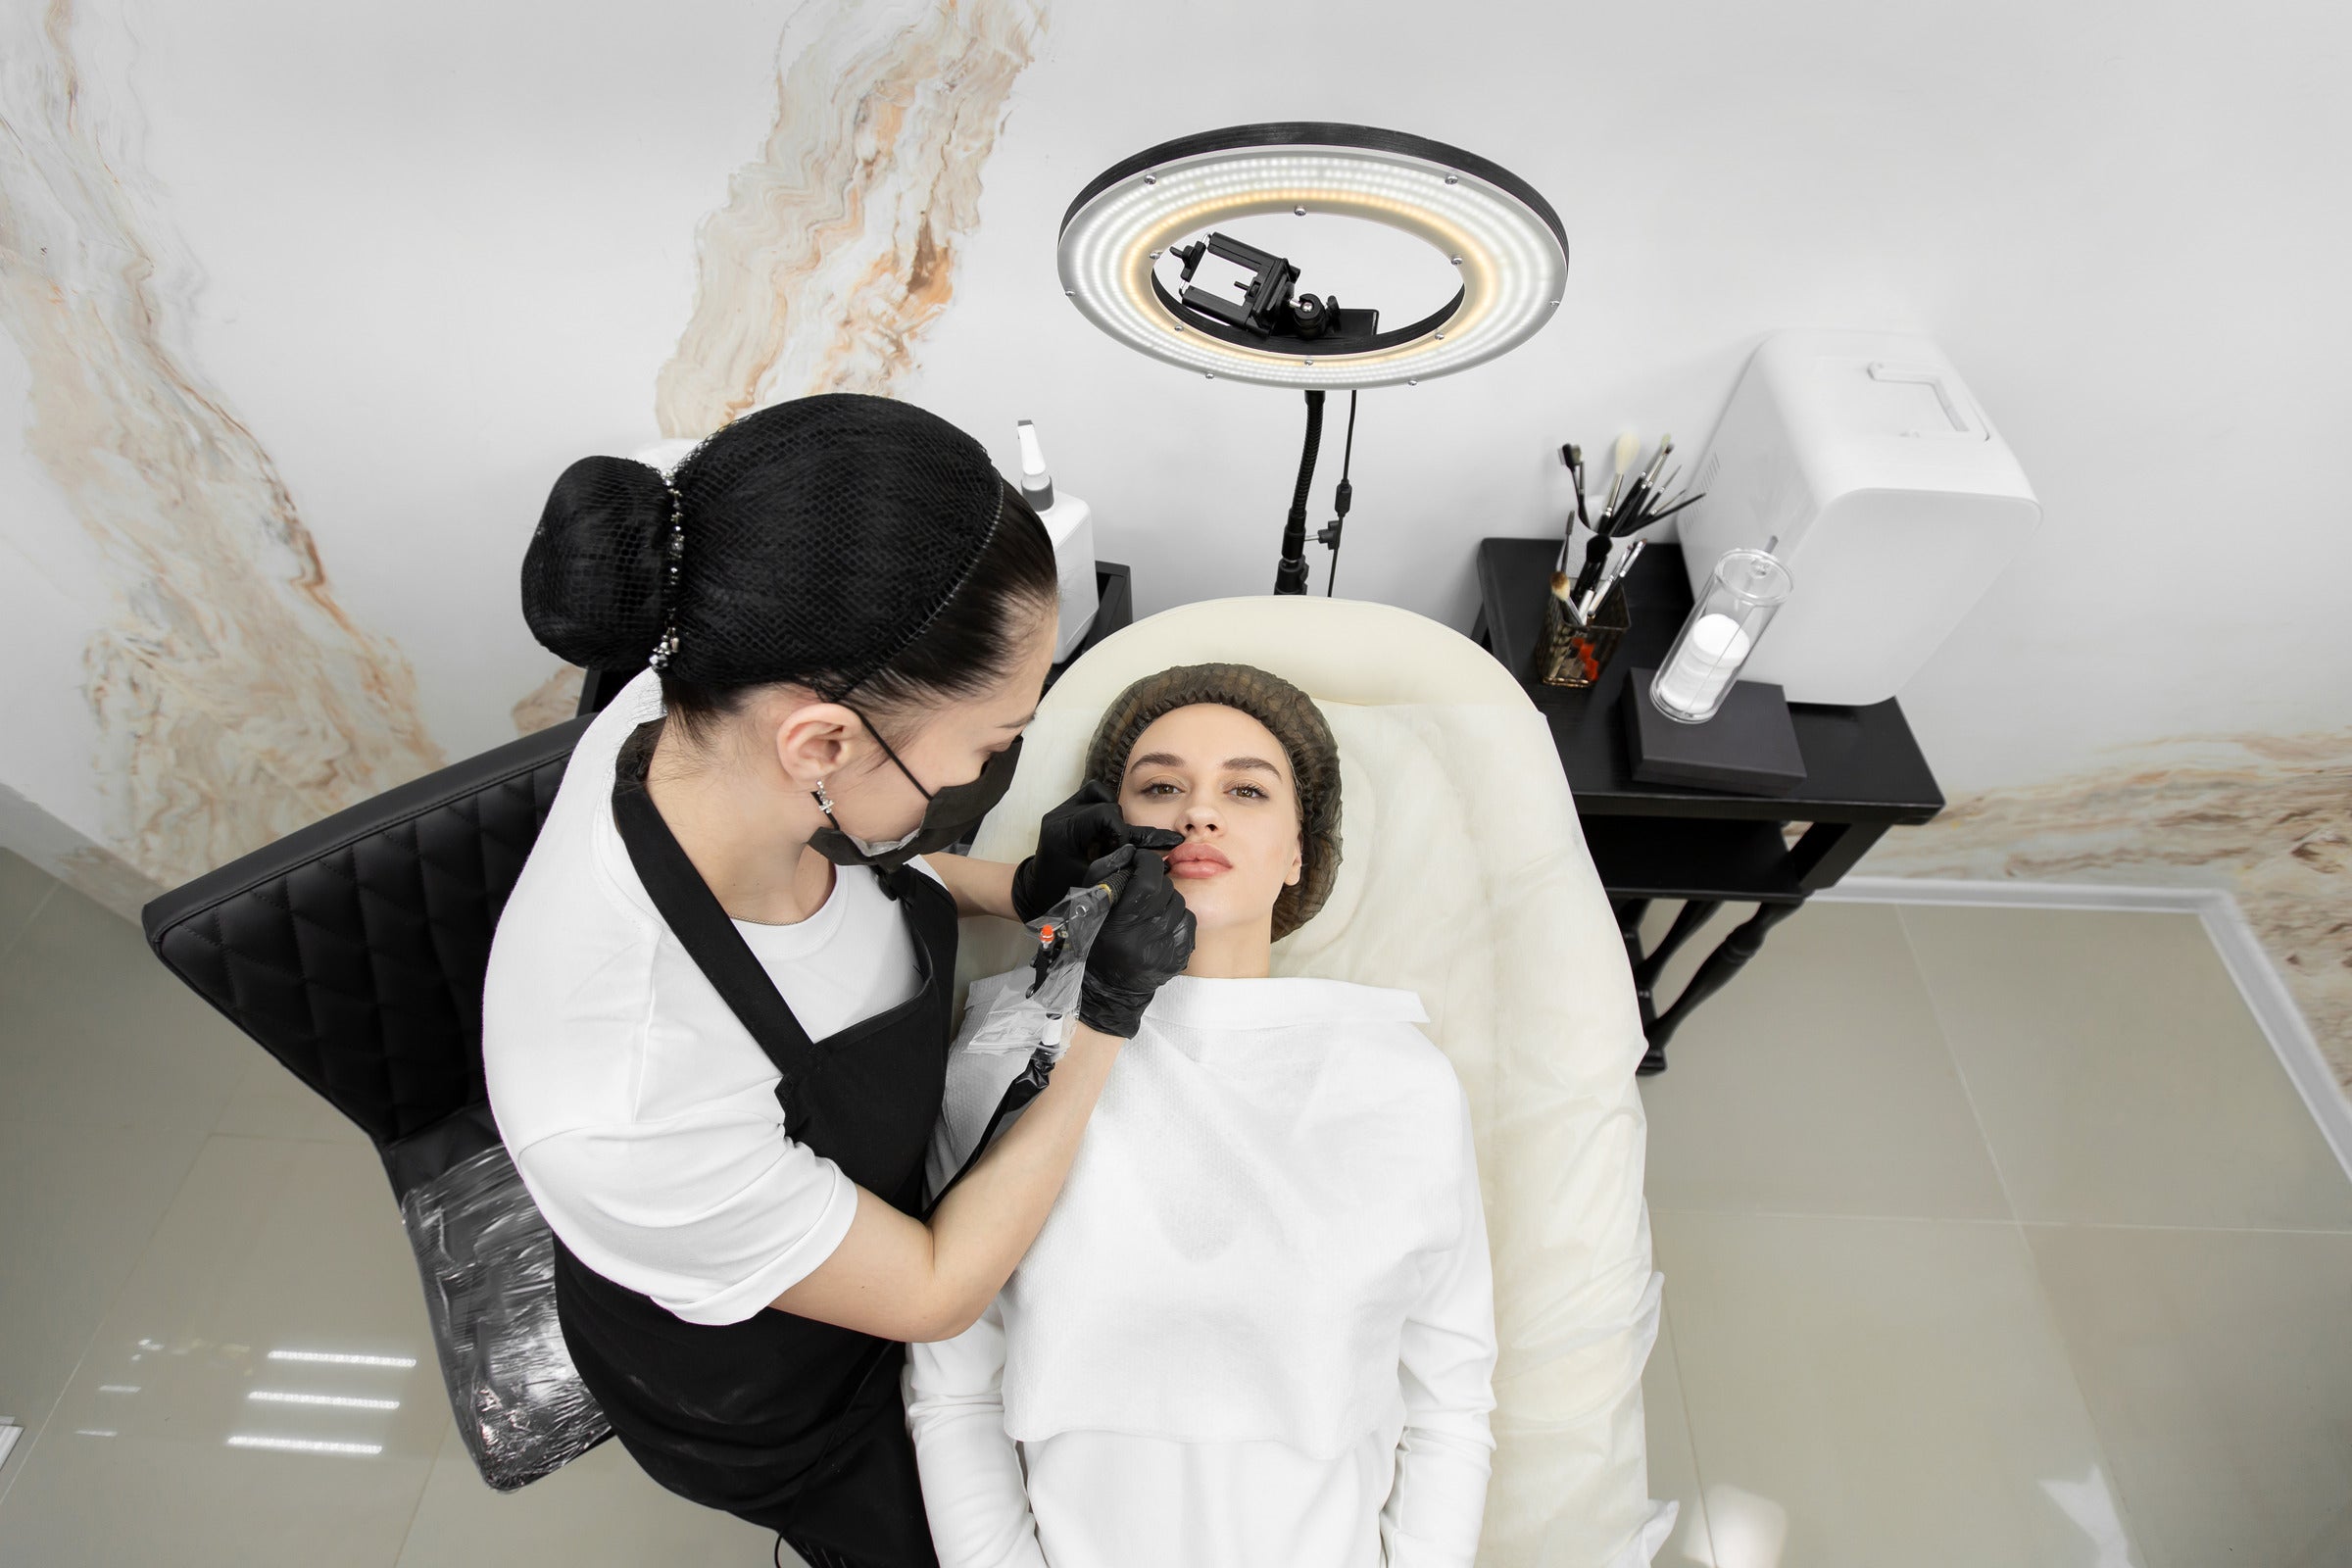 Overview of permanent makeup safety